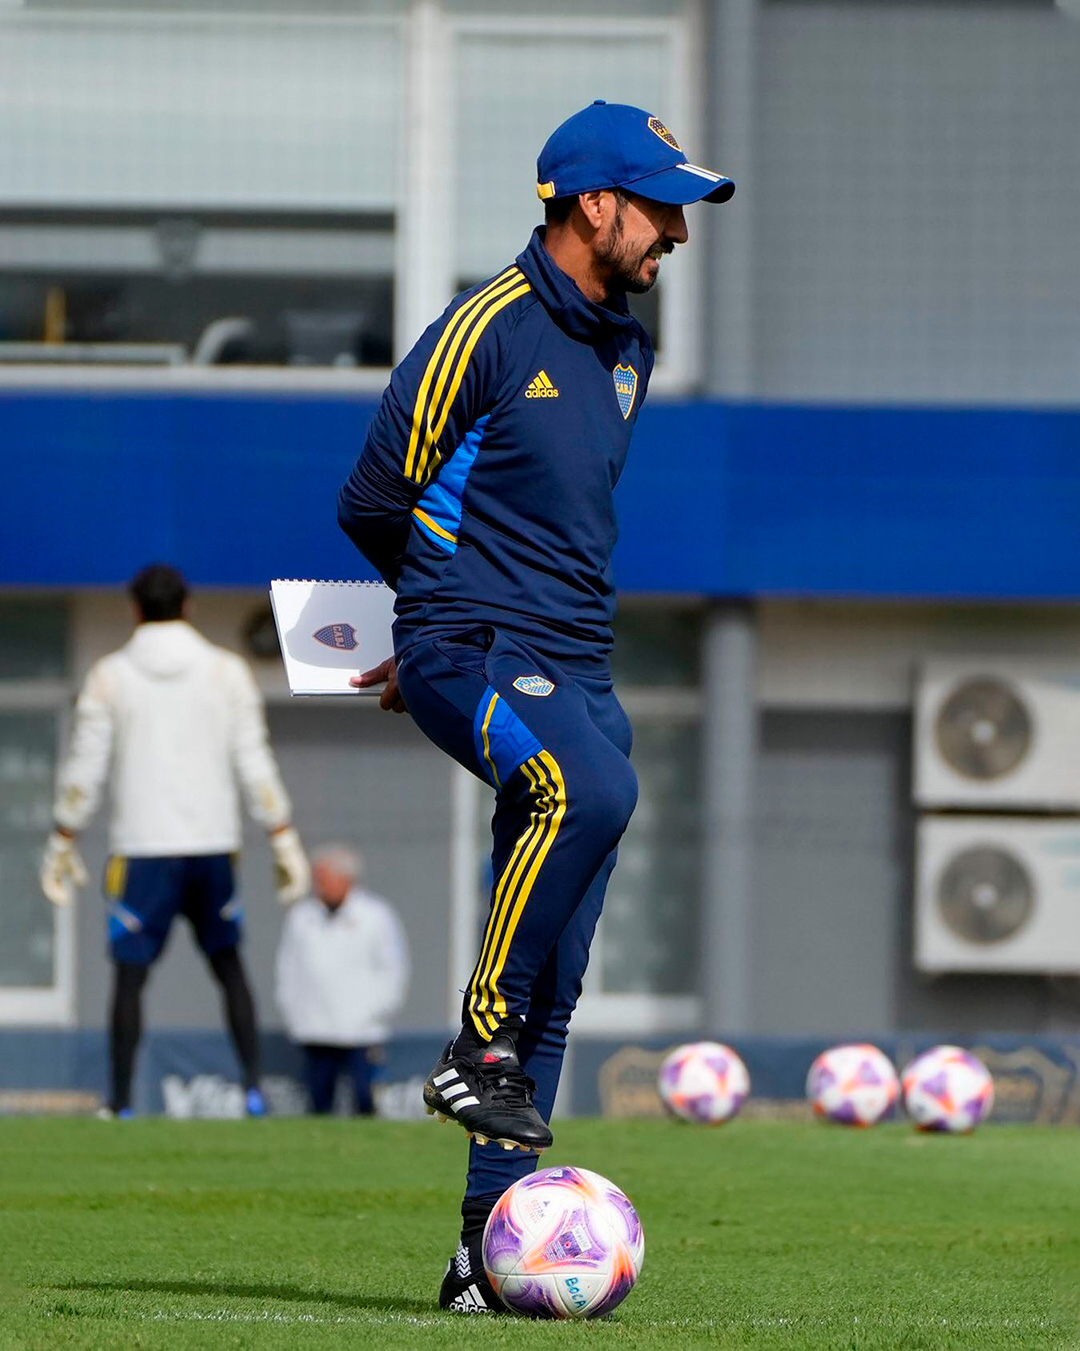 Tano Gracián in one of the training sessions (@bocajrsoficial)